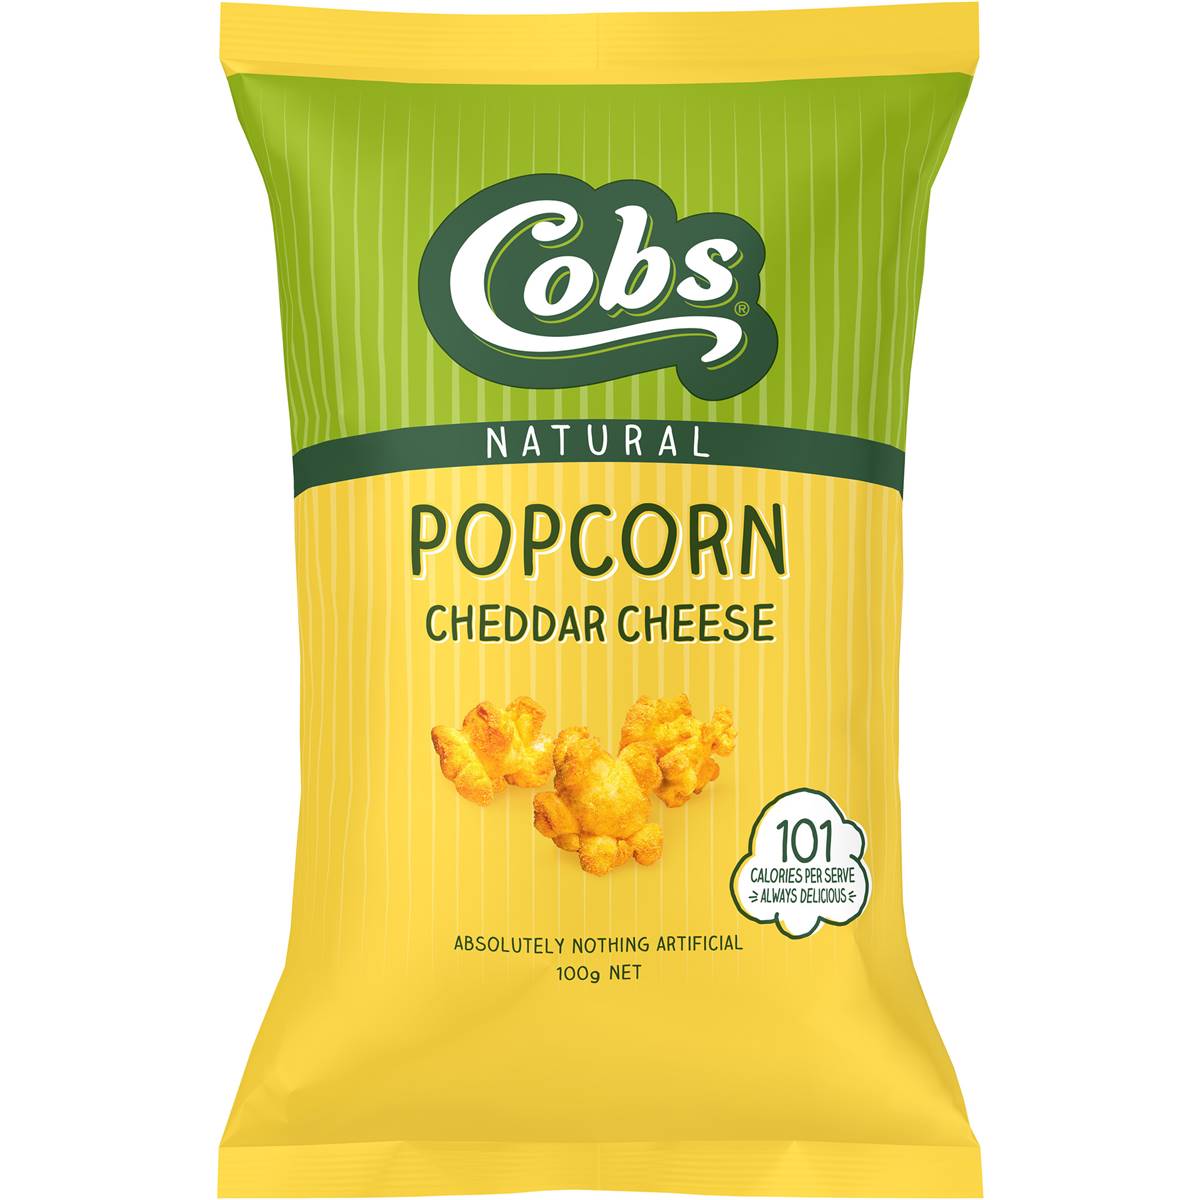 Calories in Cobs Popcorn Cheddar Cheese Gluten Free